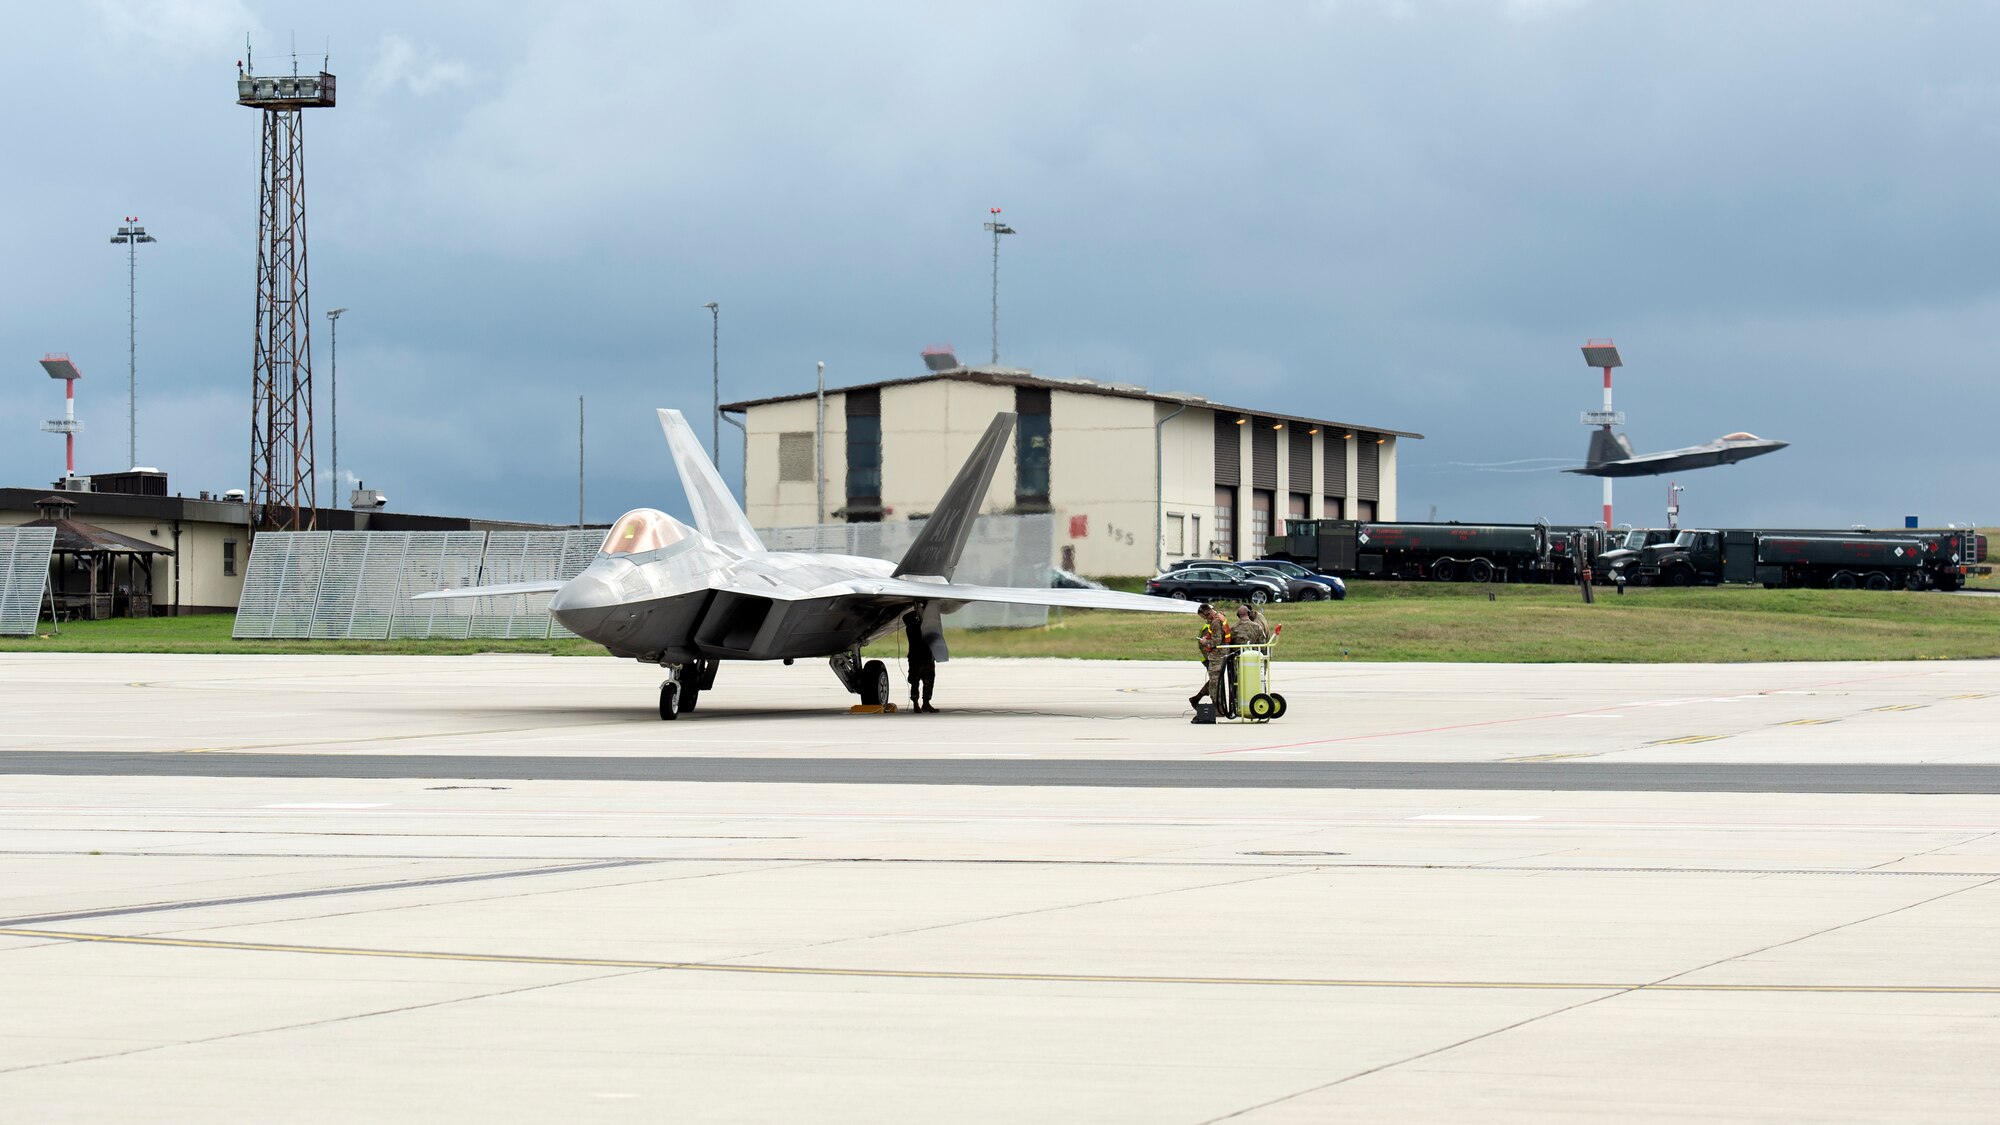 An F-22 Raptor takes off after receiving fuel at Spangdahlem Air Base, Germany.